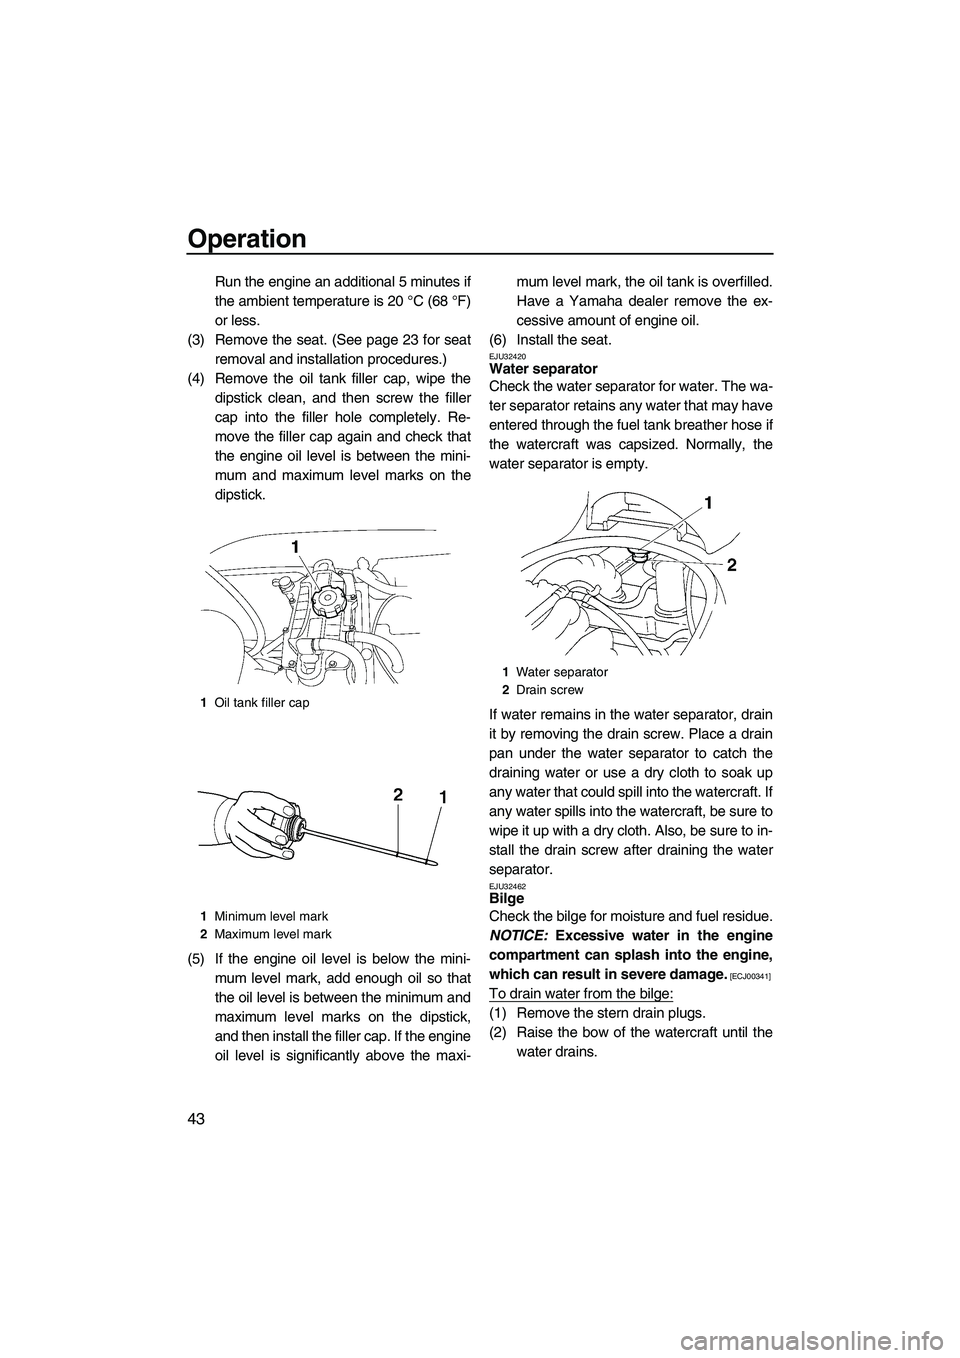 YAMAHA VX 2009  Owners Manual Operation
43
Run the engine an additional 5 minutes if
the ambient temperature is 20 °C (68 °F)
or less.
(3) Remove the seat. (See page 23 for seat
removal and installation procedures.)
(4) Remove t